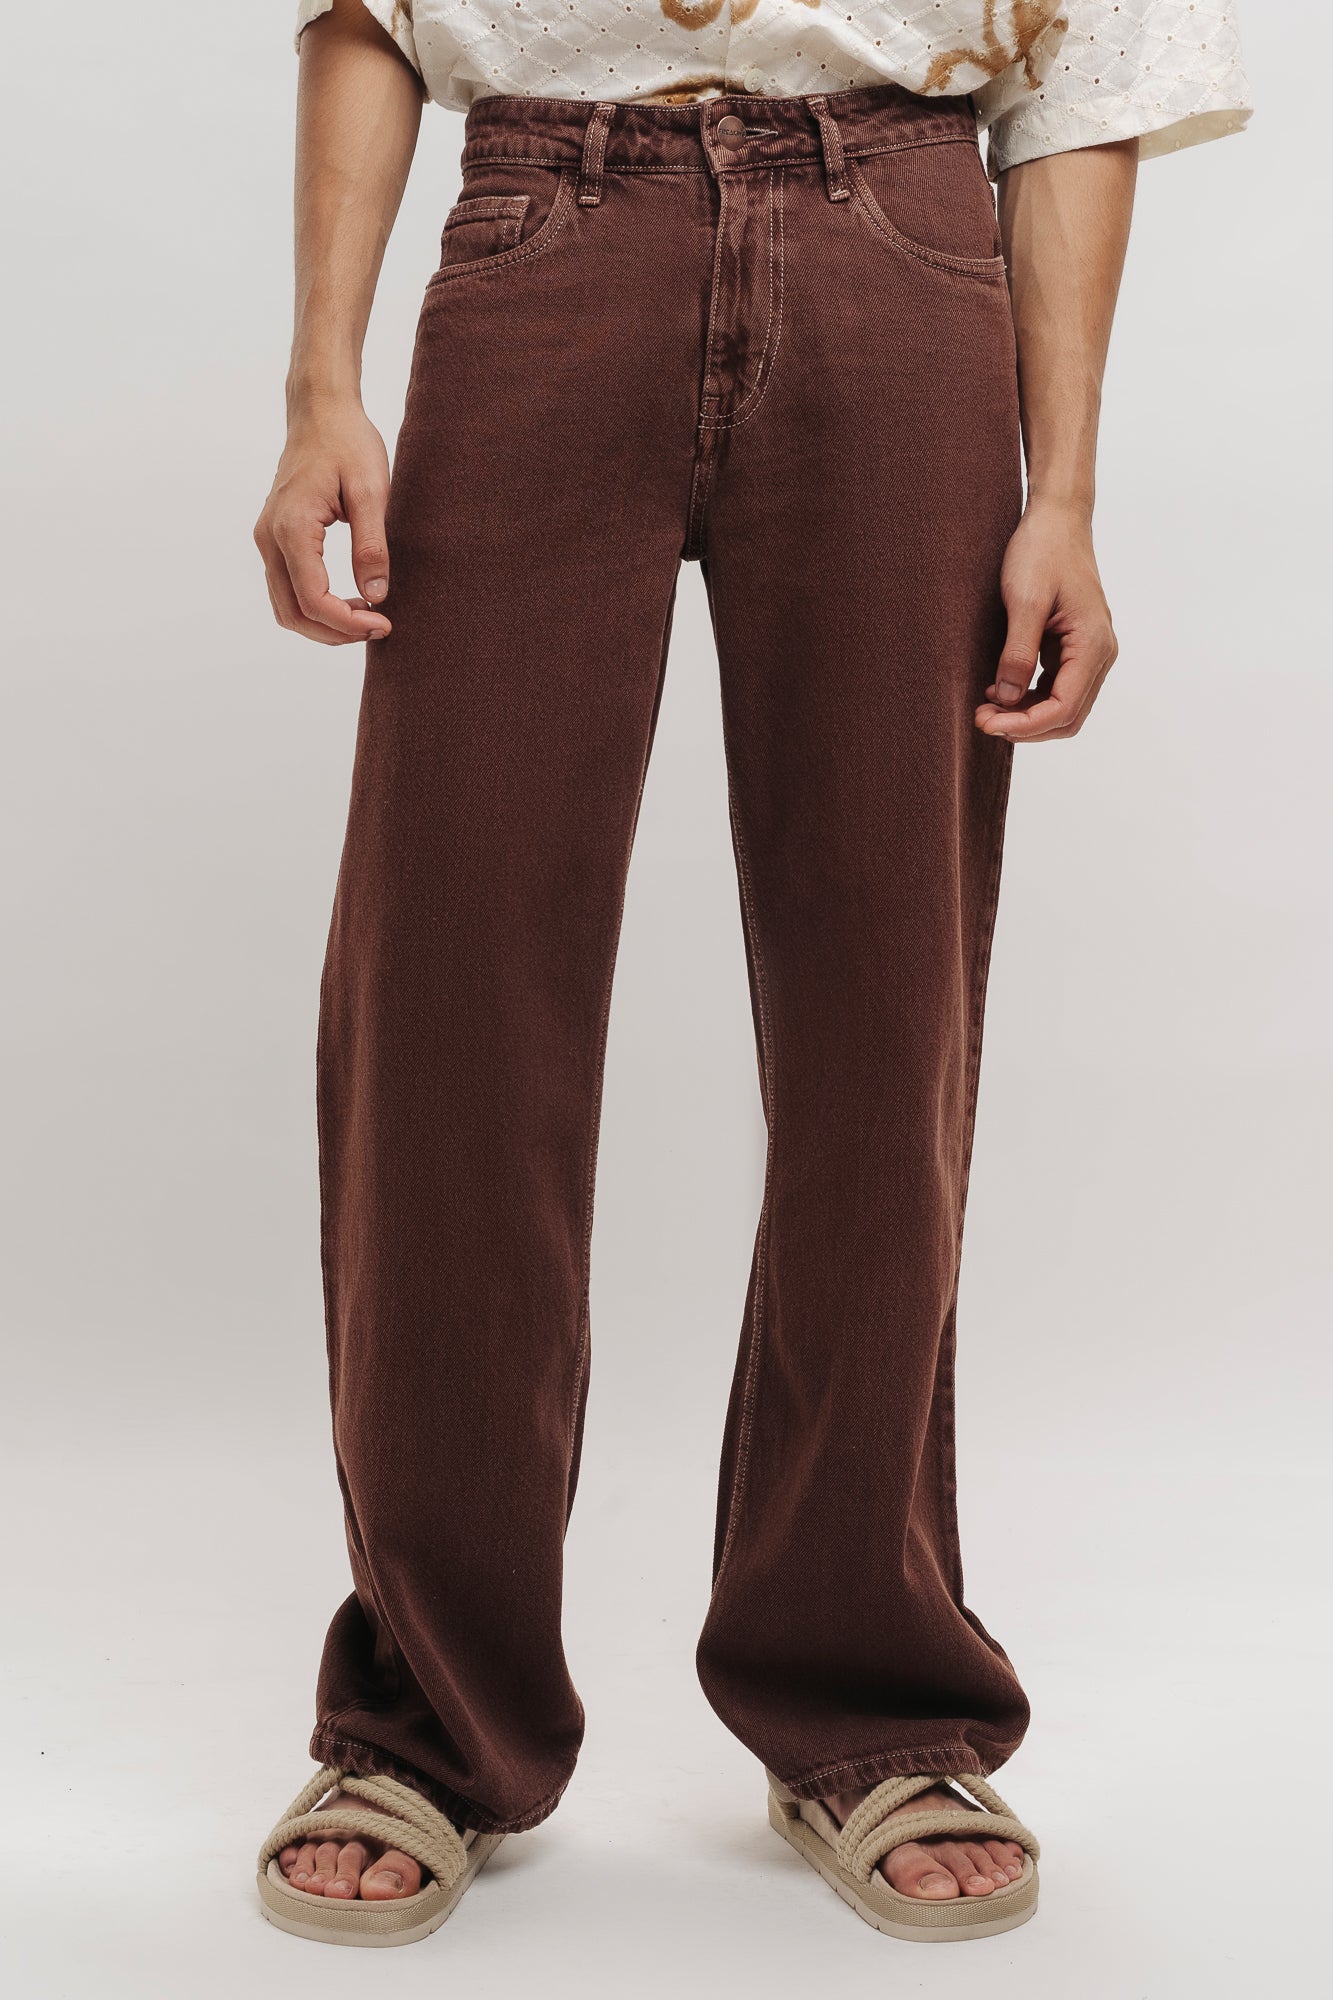 CONTRAST BROWN MEN'S RELAXED STRAIGHT JEANS